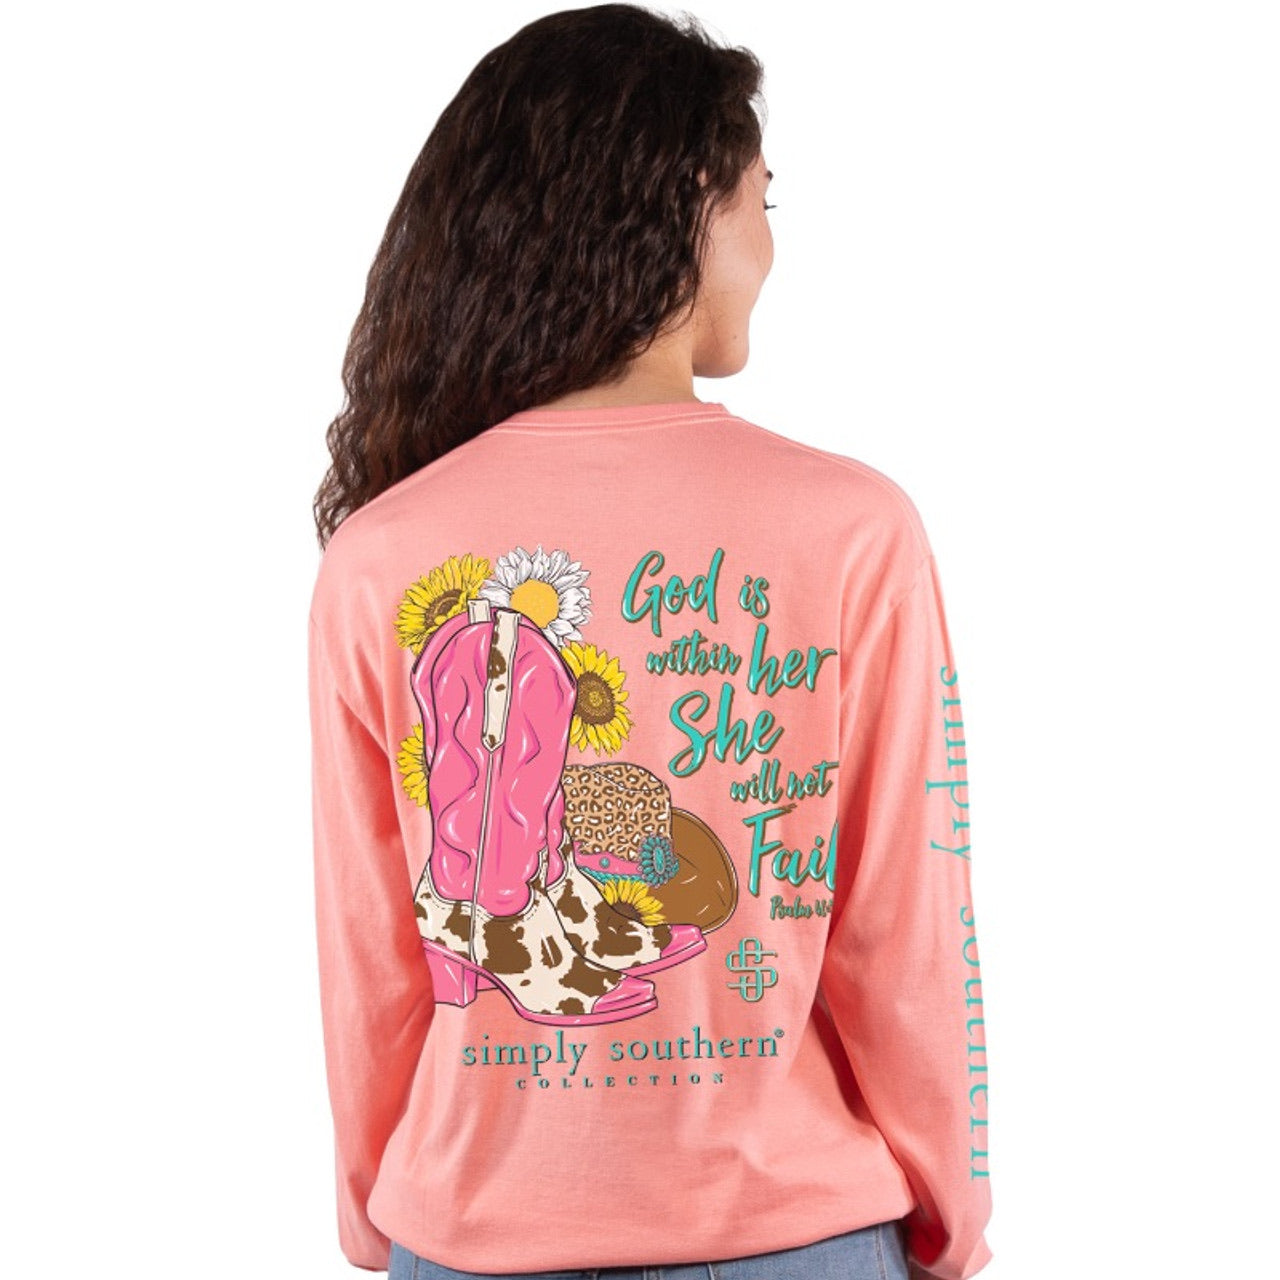 FINAL SALE - Simply Southern - God is Within Her Long Sleeve Tee